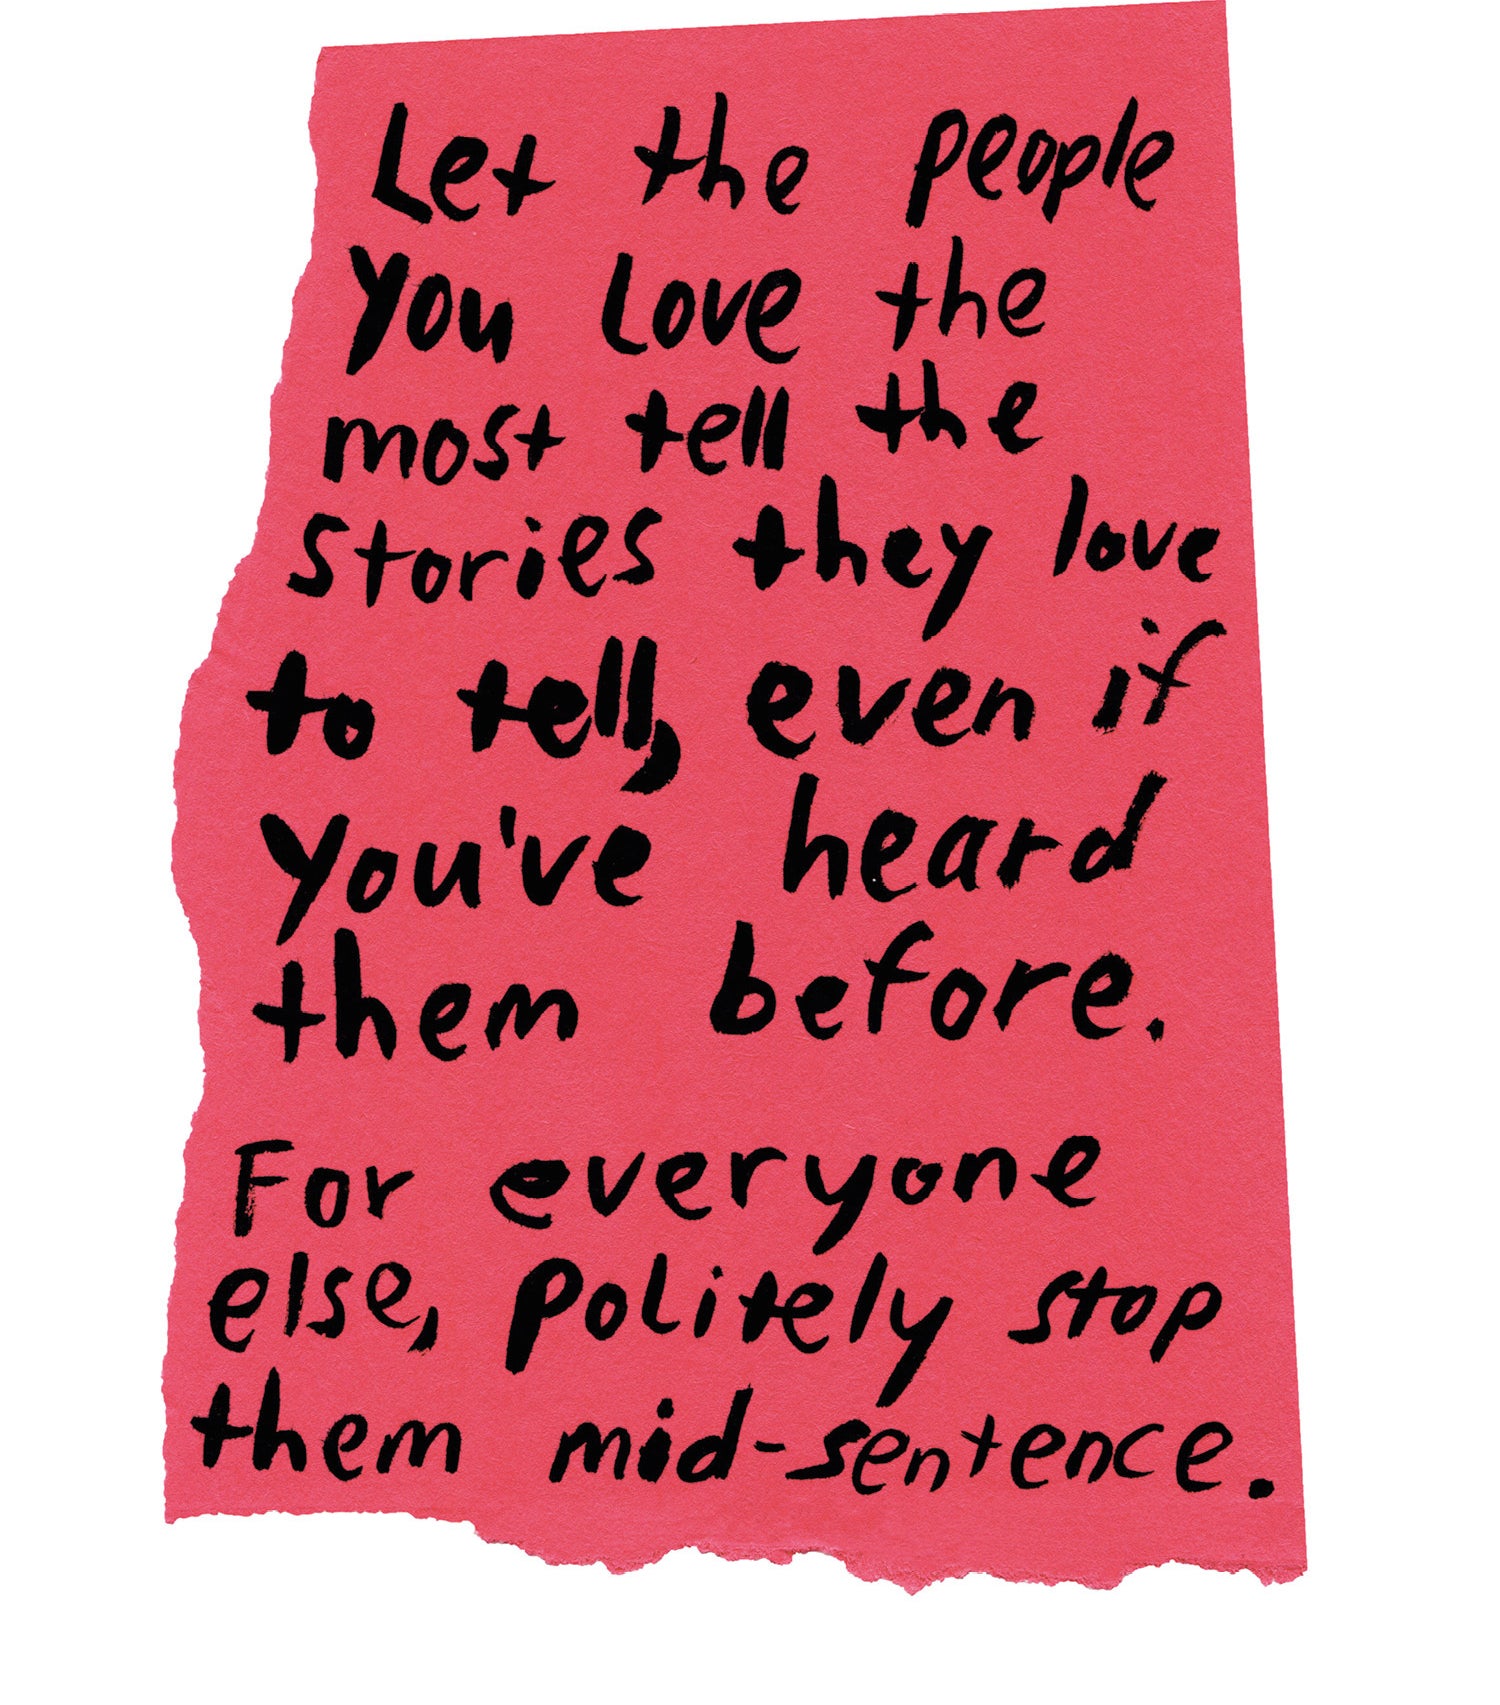 Handwritten text on torn piece of colored paper: &quot;Let the people you love the most tell the stories they love to tell, even if you&#x27;ve heard them before. For everyone else, politely stop them mid-sentence.&quot;